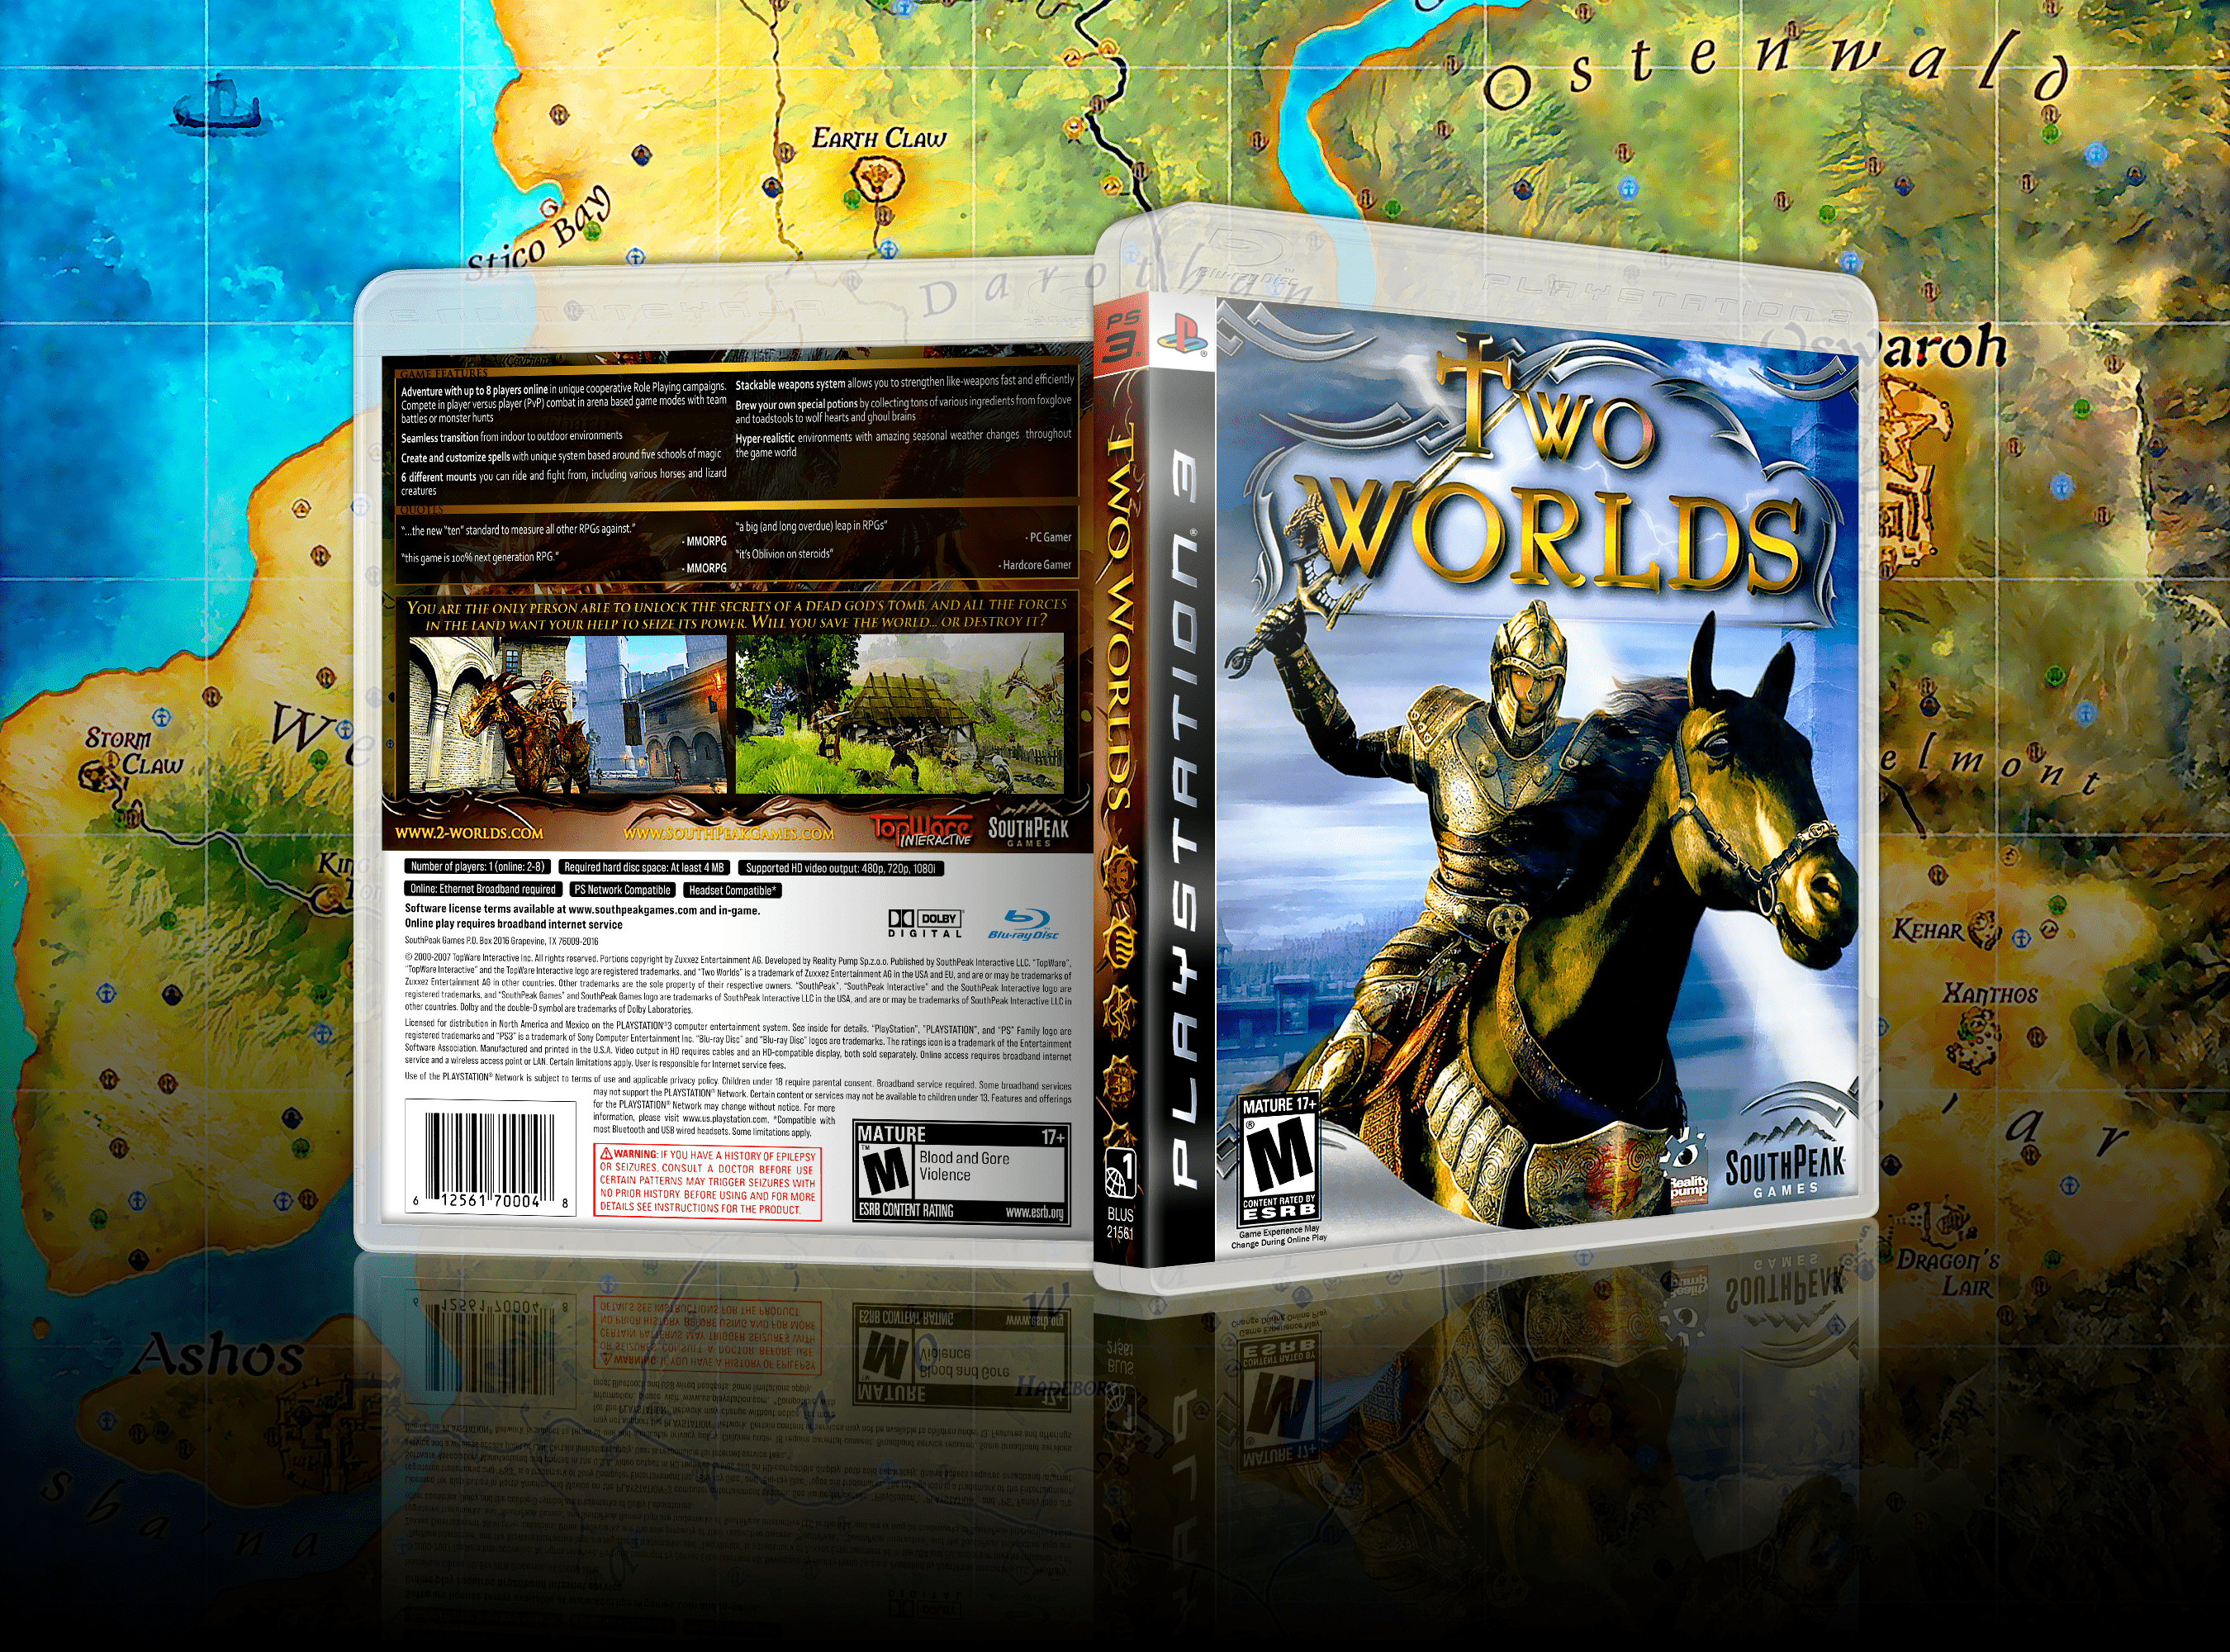 Two Worlds box cover